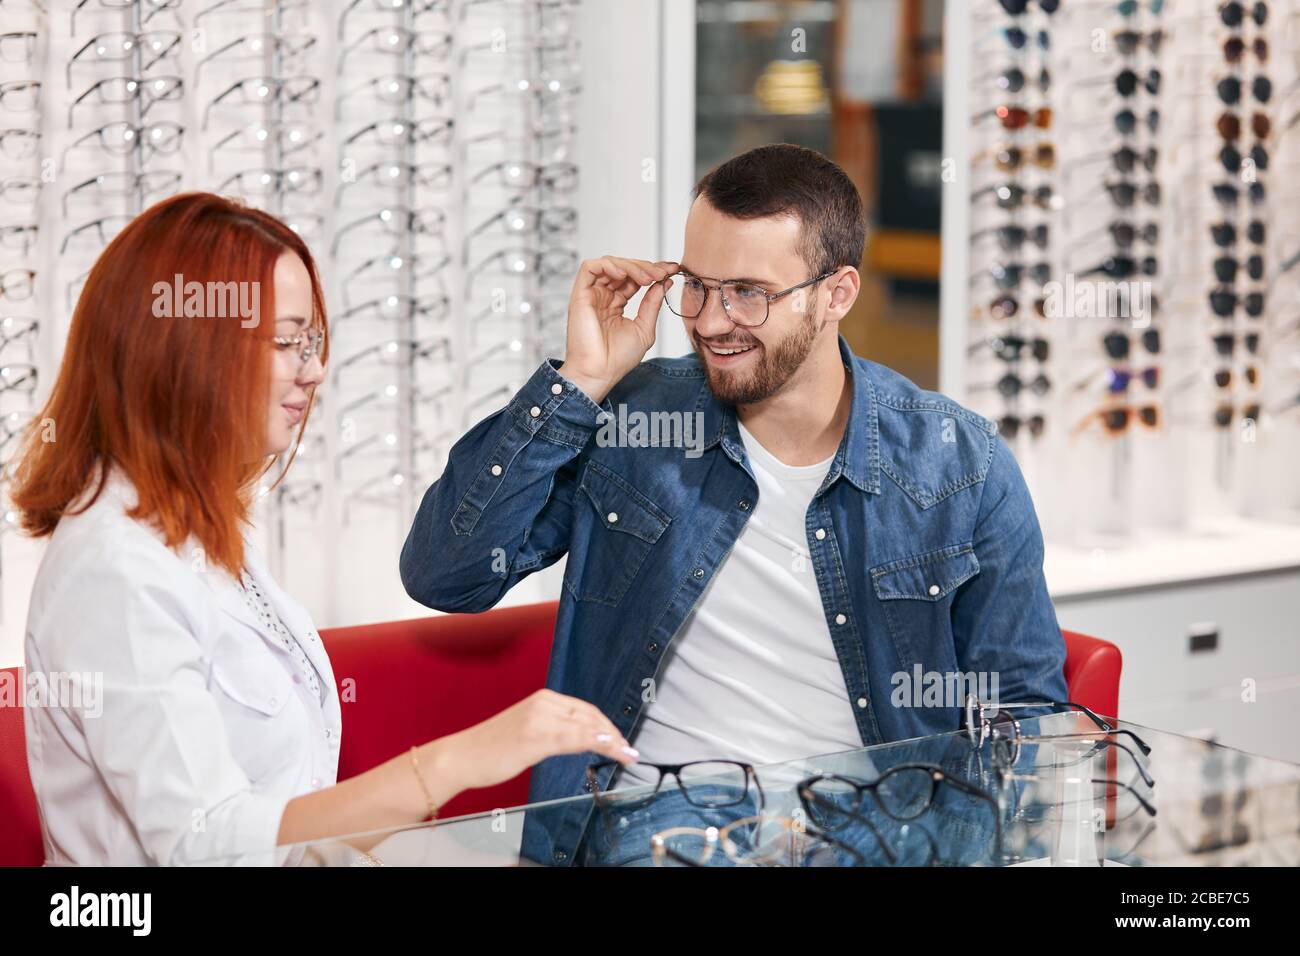 young positive man in denim jacket trying on different many glasses, close up photo. glasses on the shelf in the background of the photo Stock Photo